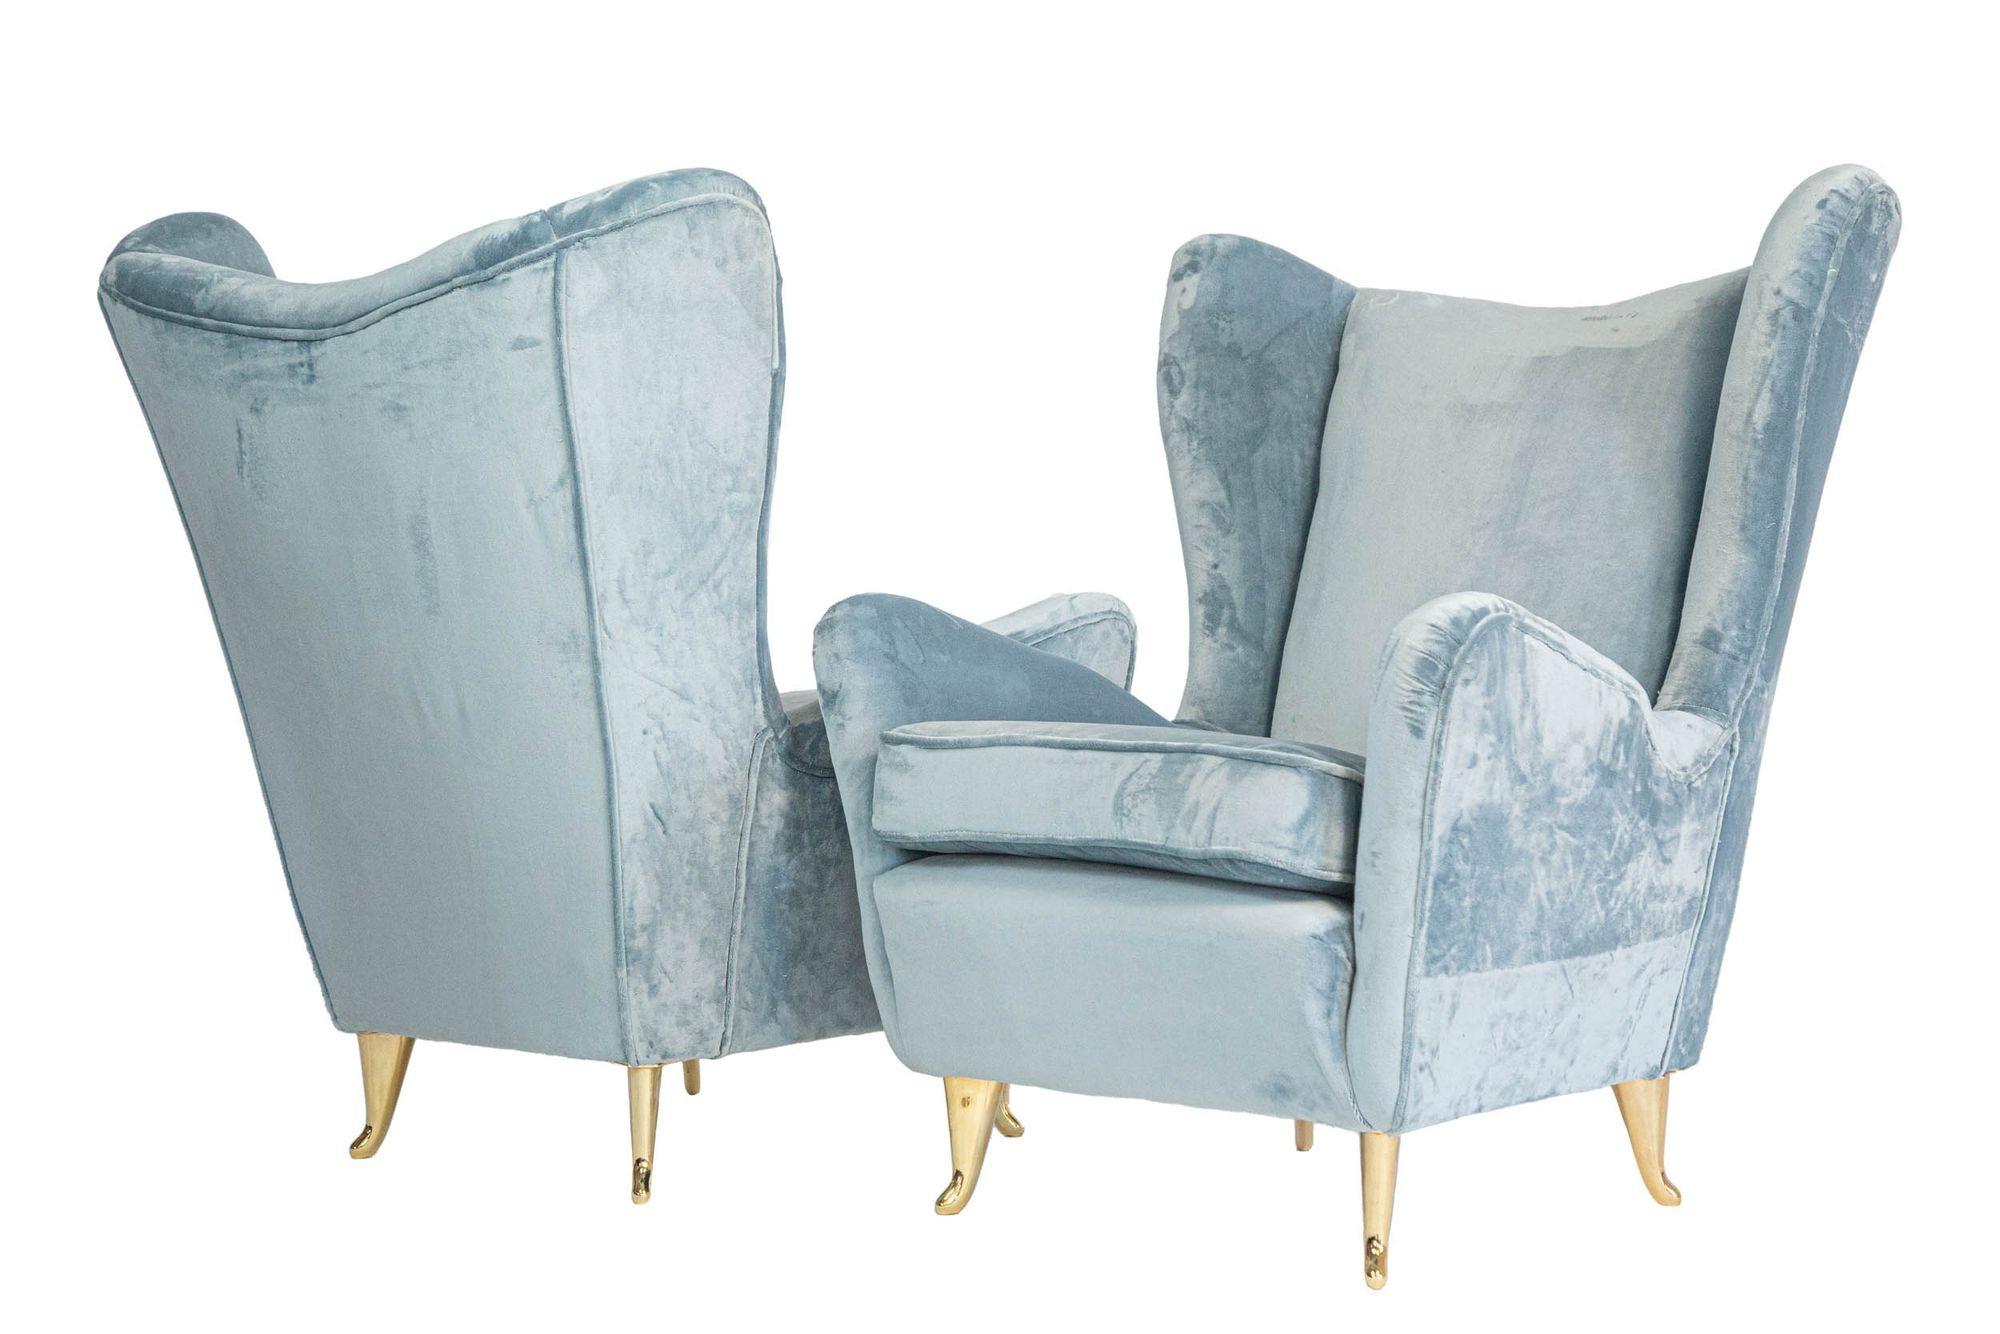 Rare set of two armchairs from ISA Bergamo. The original feet had left no more plating and were sent to restore and plate over again.
Armchairs were re-upholstered with Rubelli Martora writing velvet.
Gio Ponti attribution.
One brief explanation on